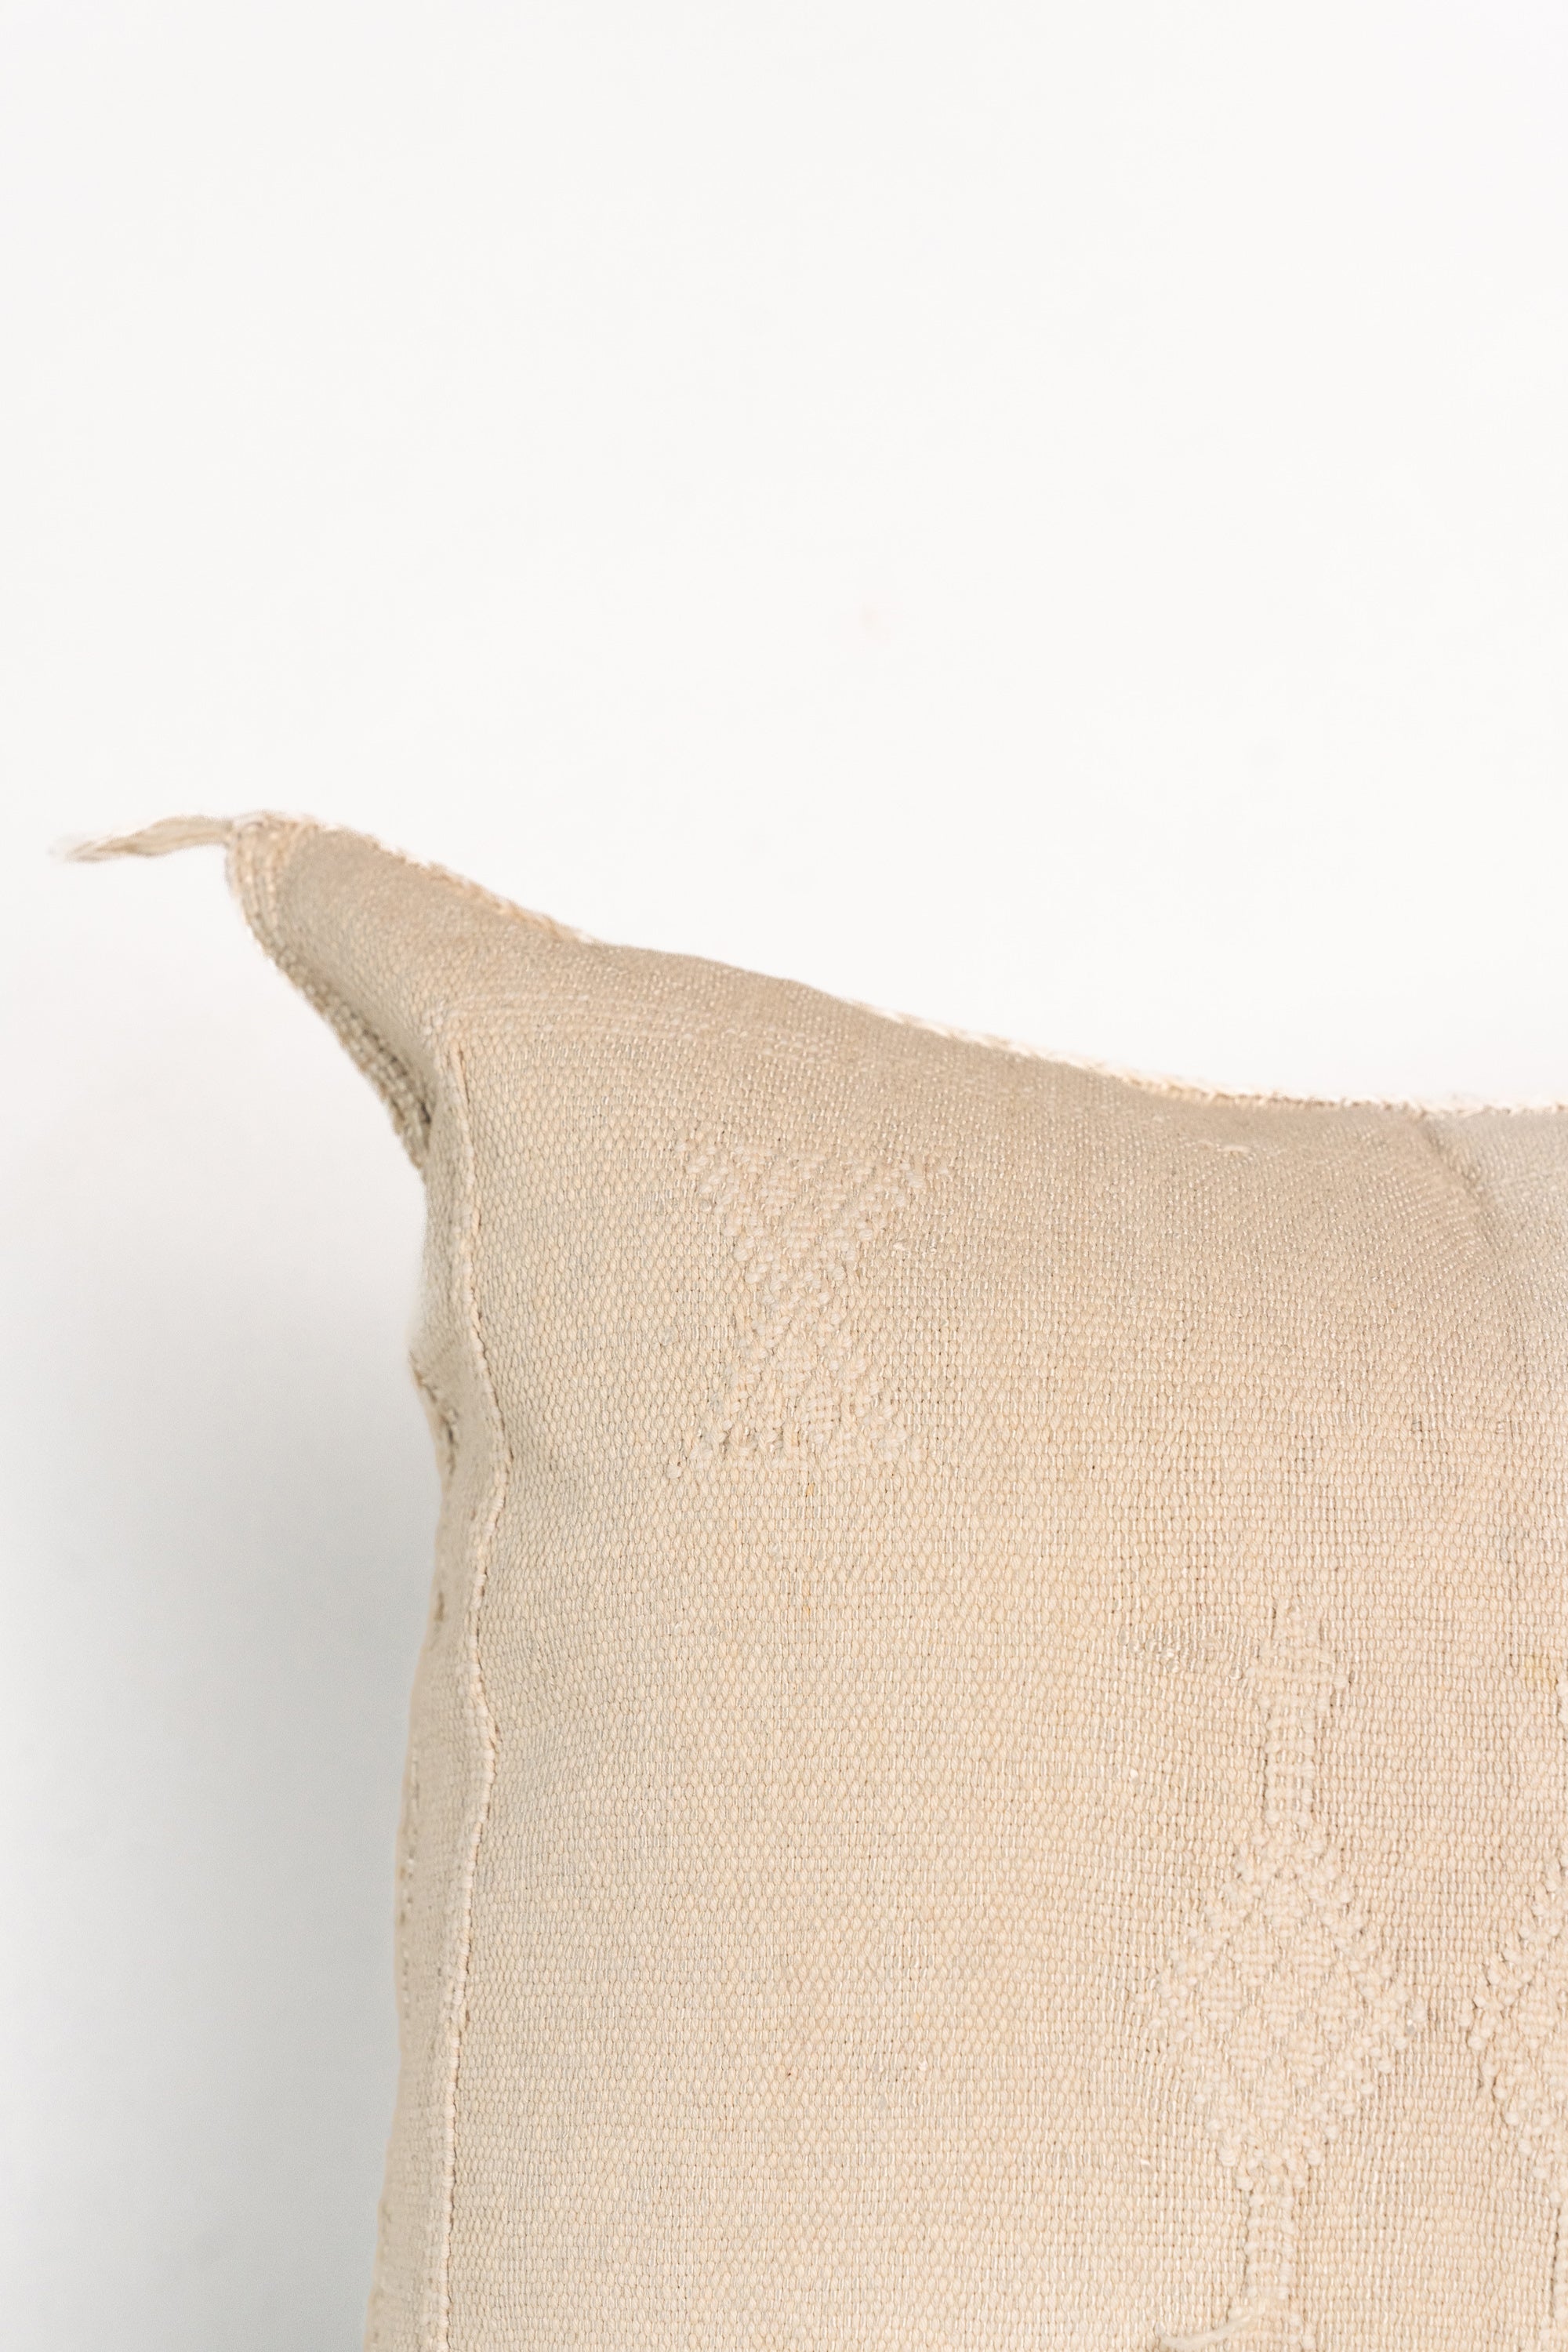 District Loom Pillow Cover No. 1104 for Anthropologie